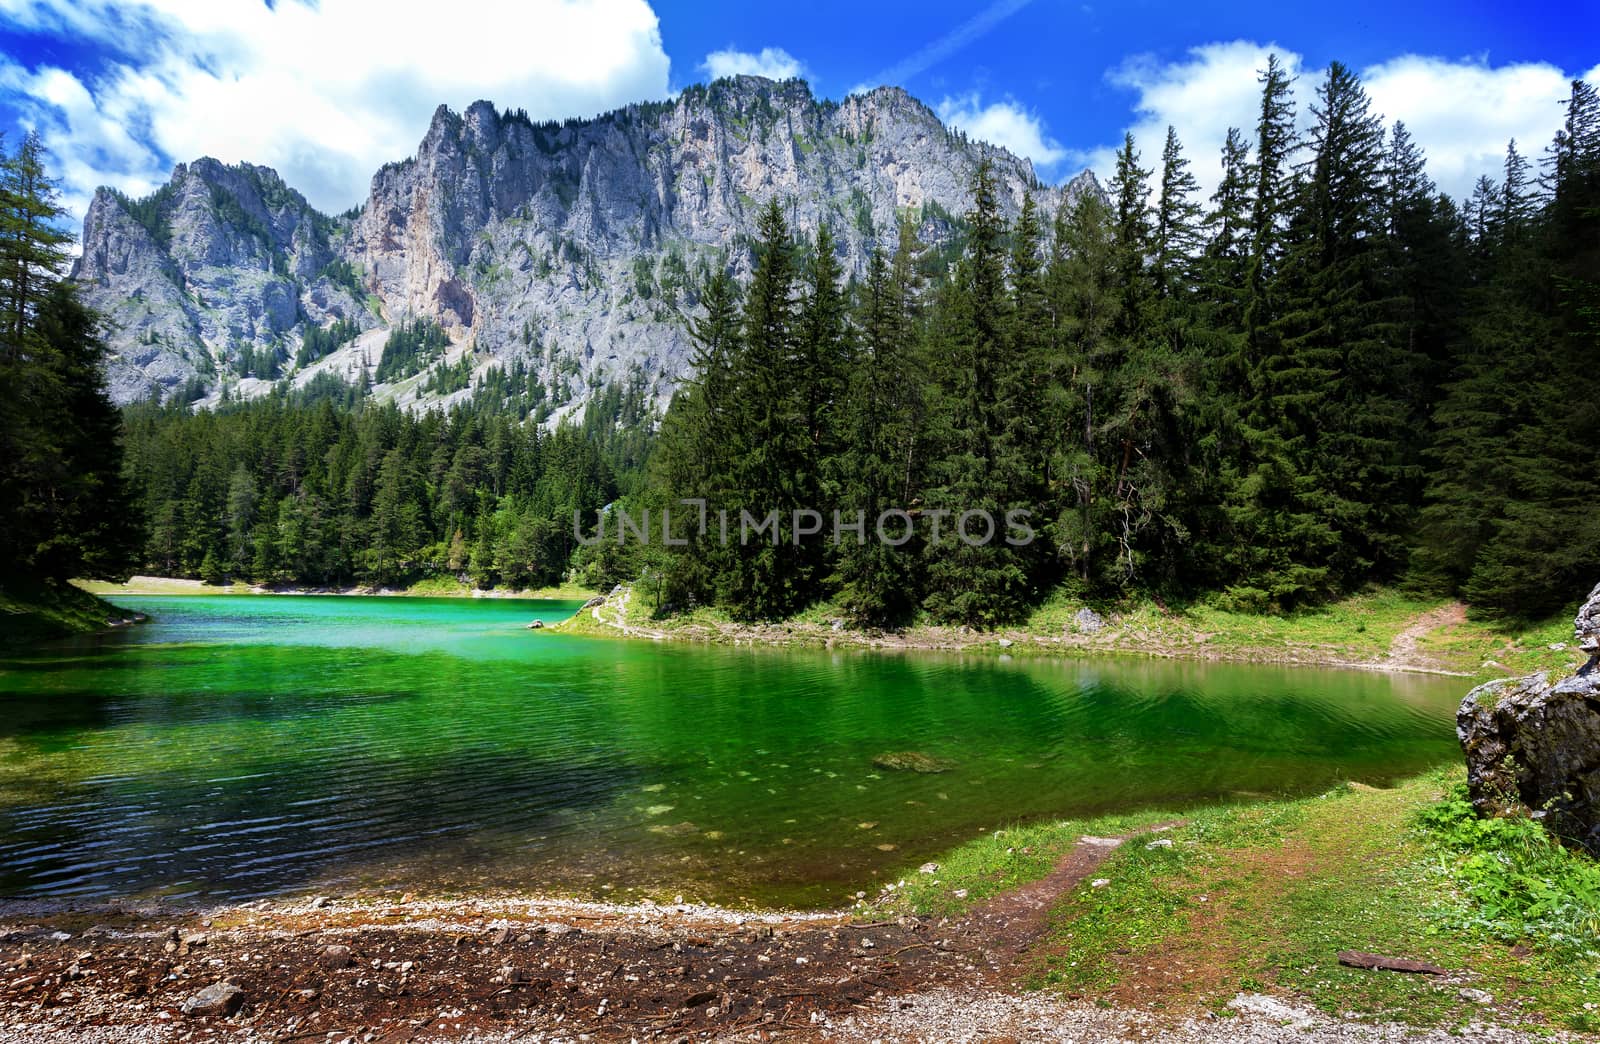 Gruner See - Beautiful green lake with crystal clear water by necro79